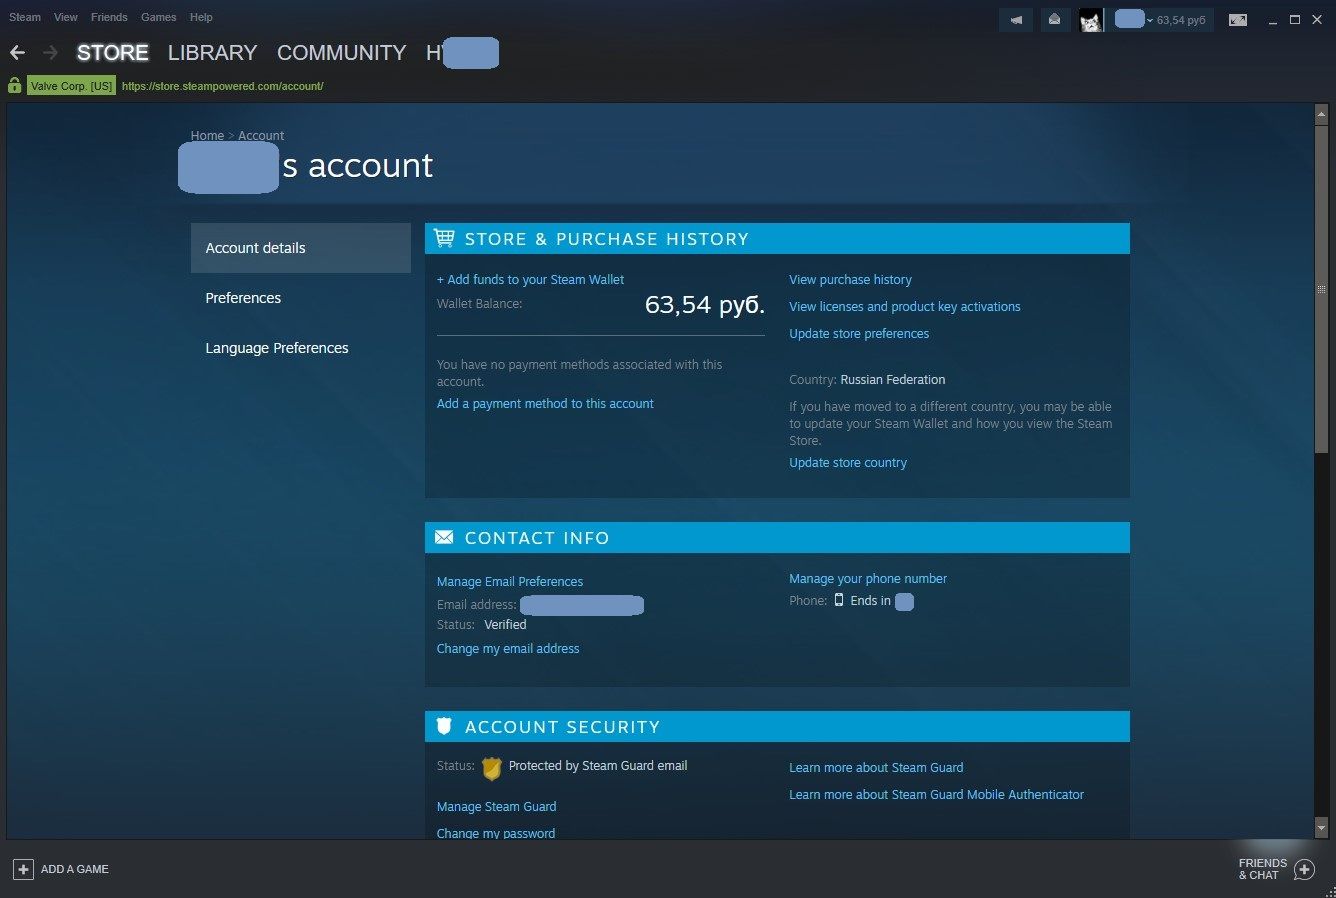 How to contact steam фото 112